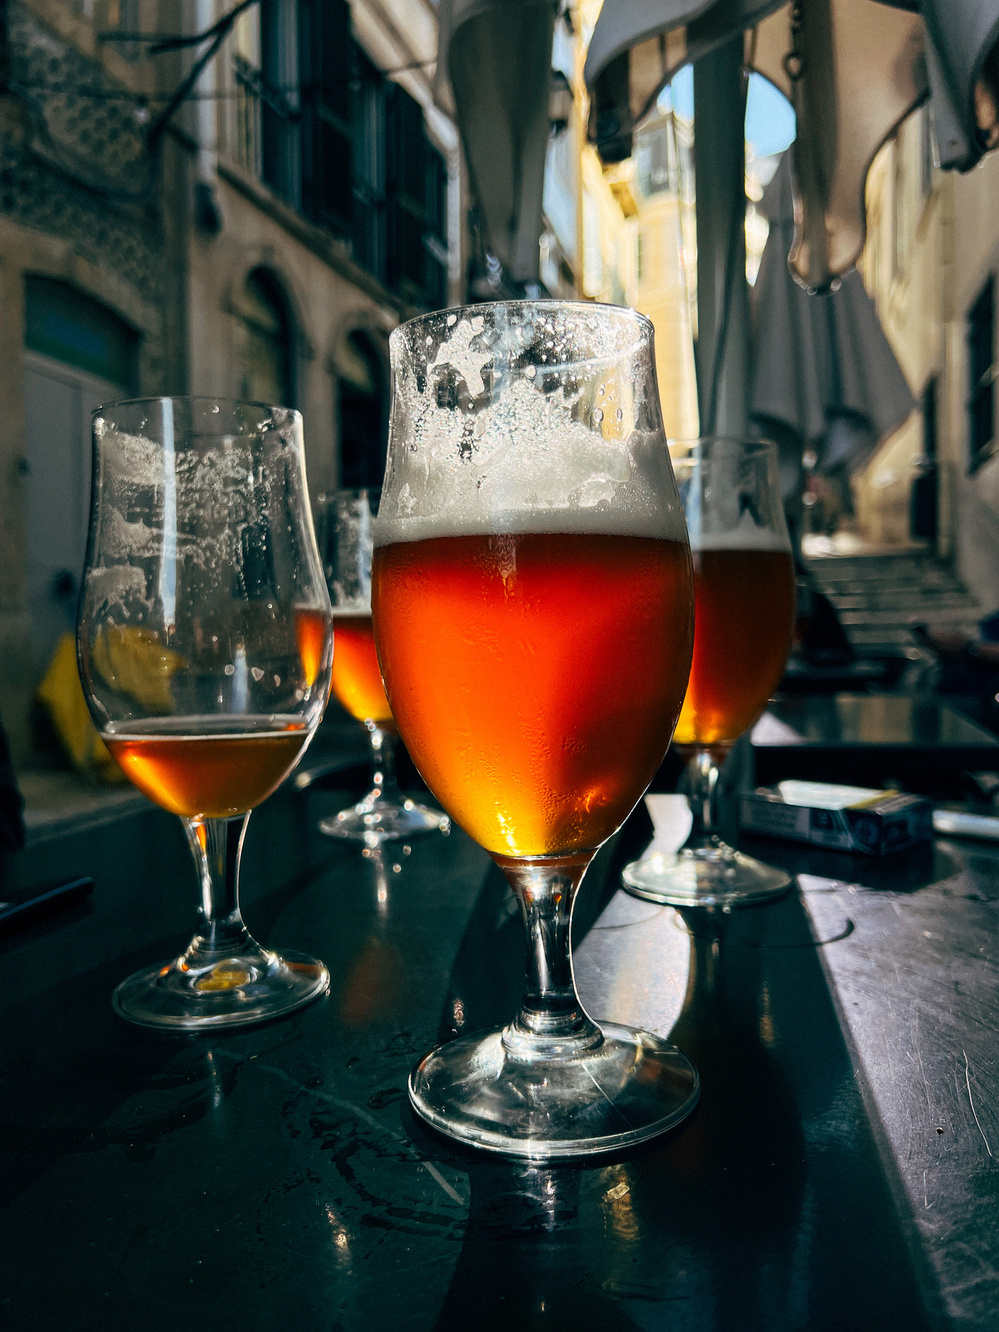 Four glasses of amber-colored beer on a dark table outdoors, in a narrow, sunlit alley, with buildings in the background.